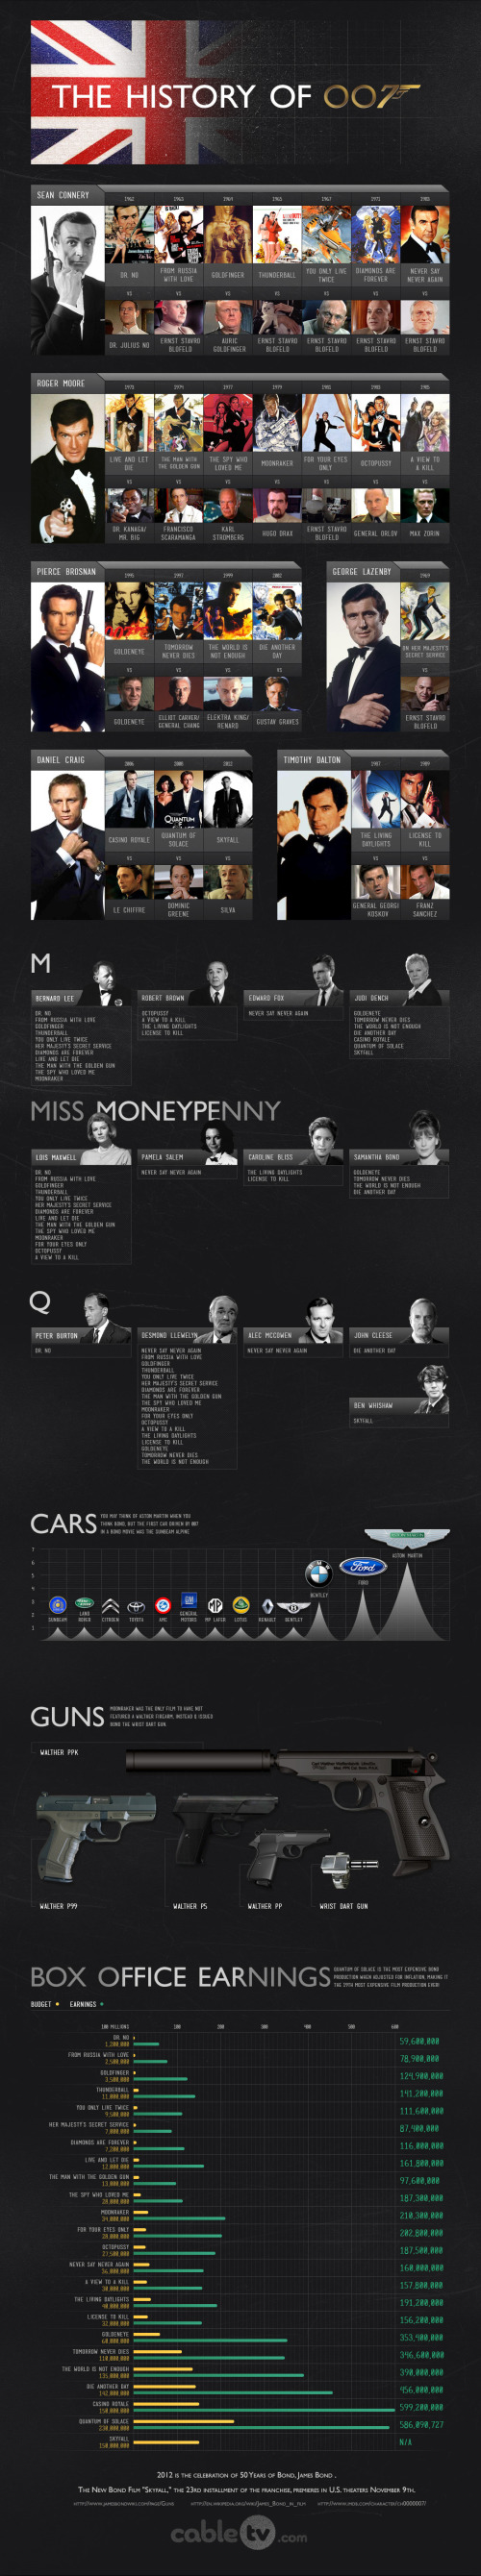 The history of 007 infographic